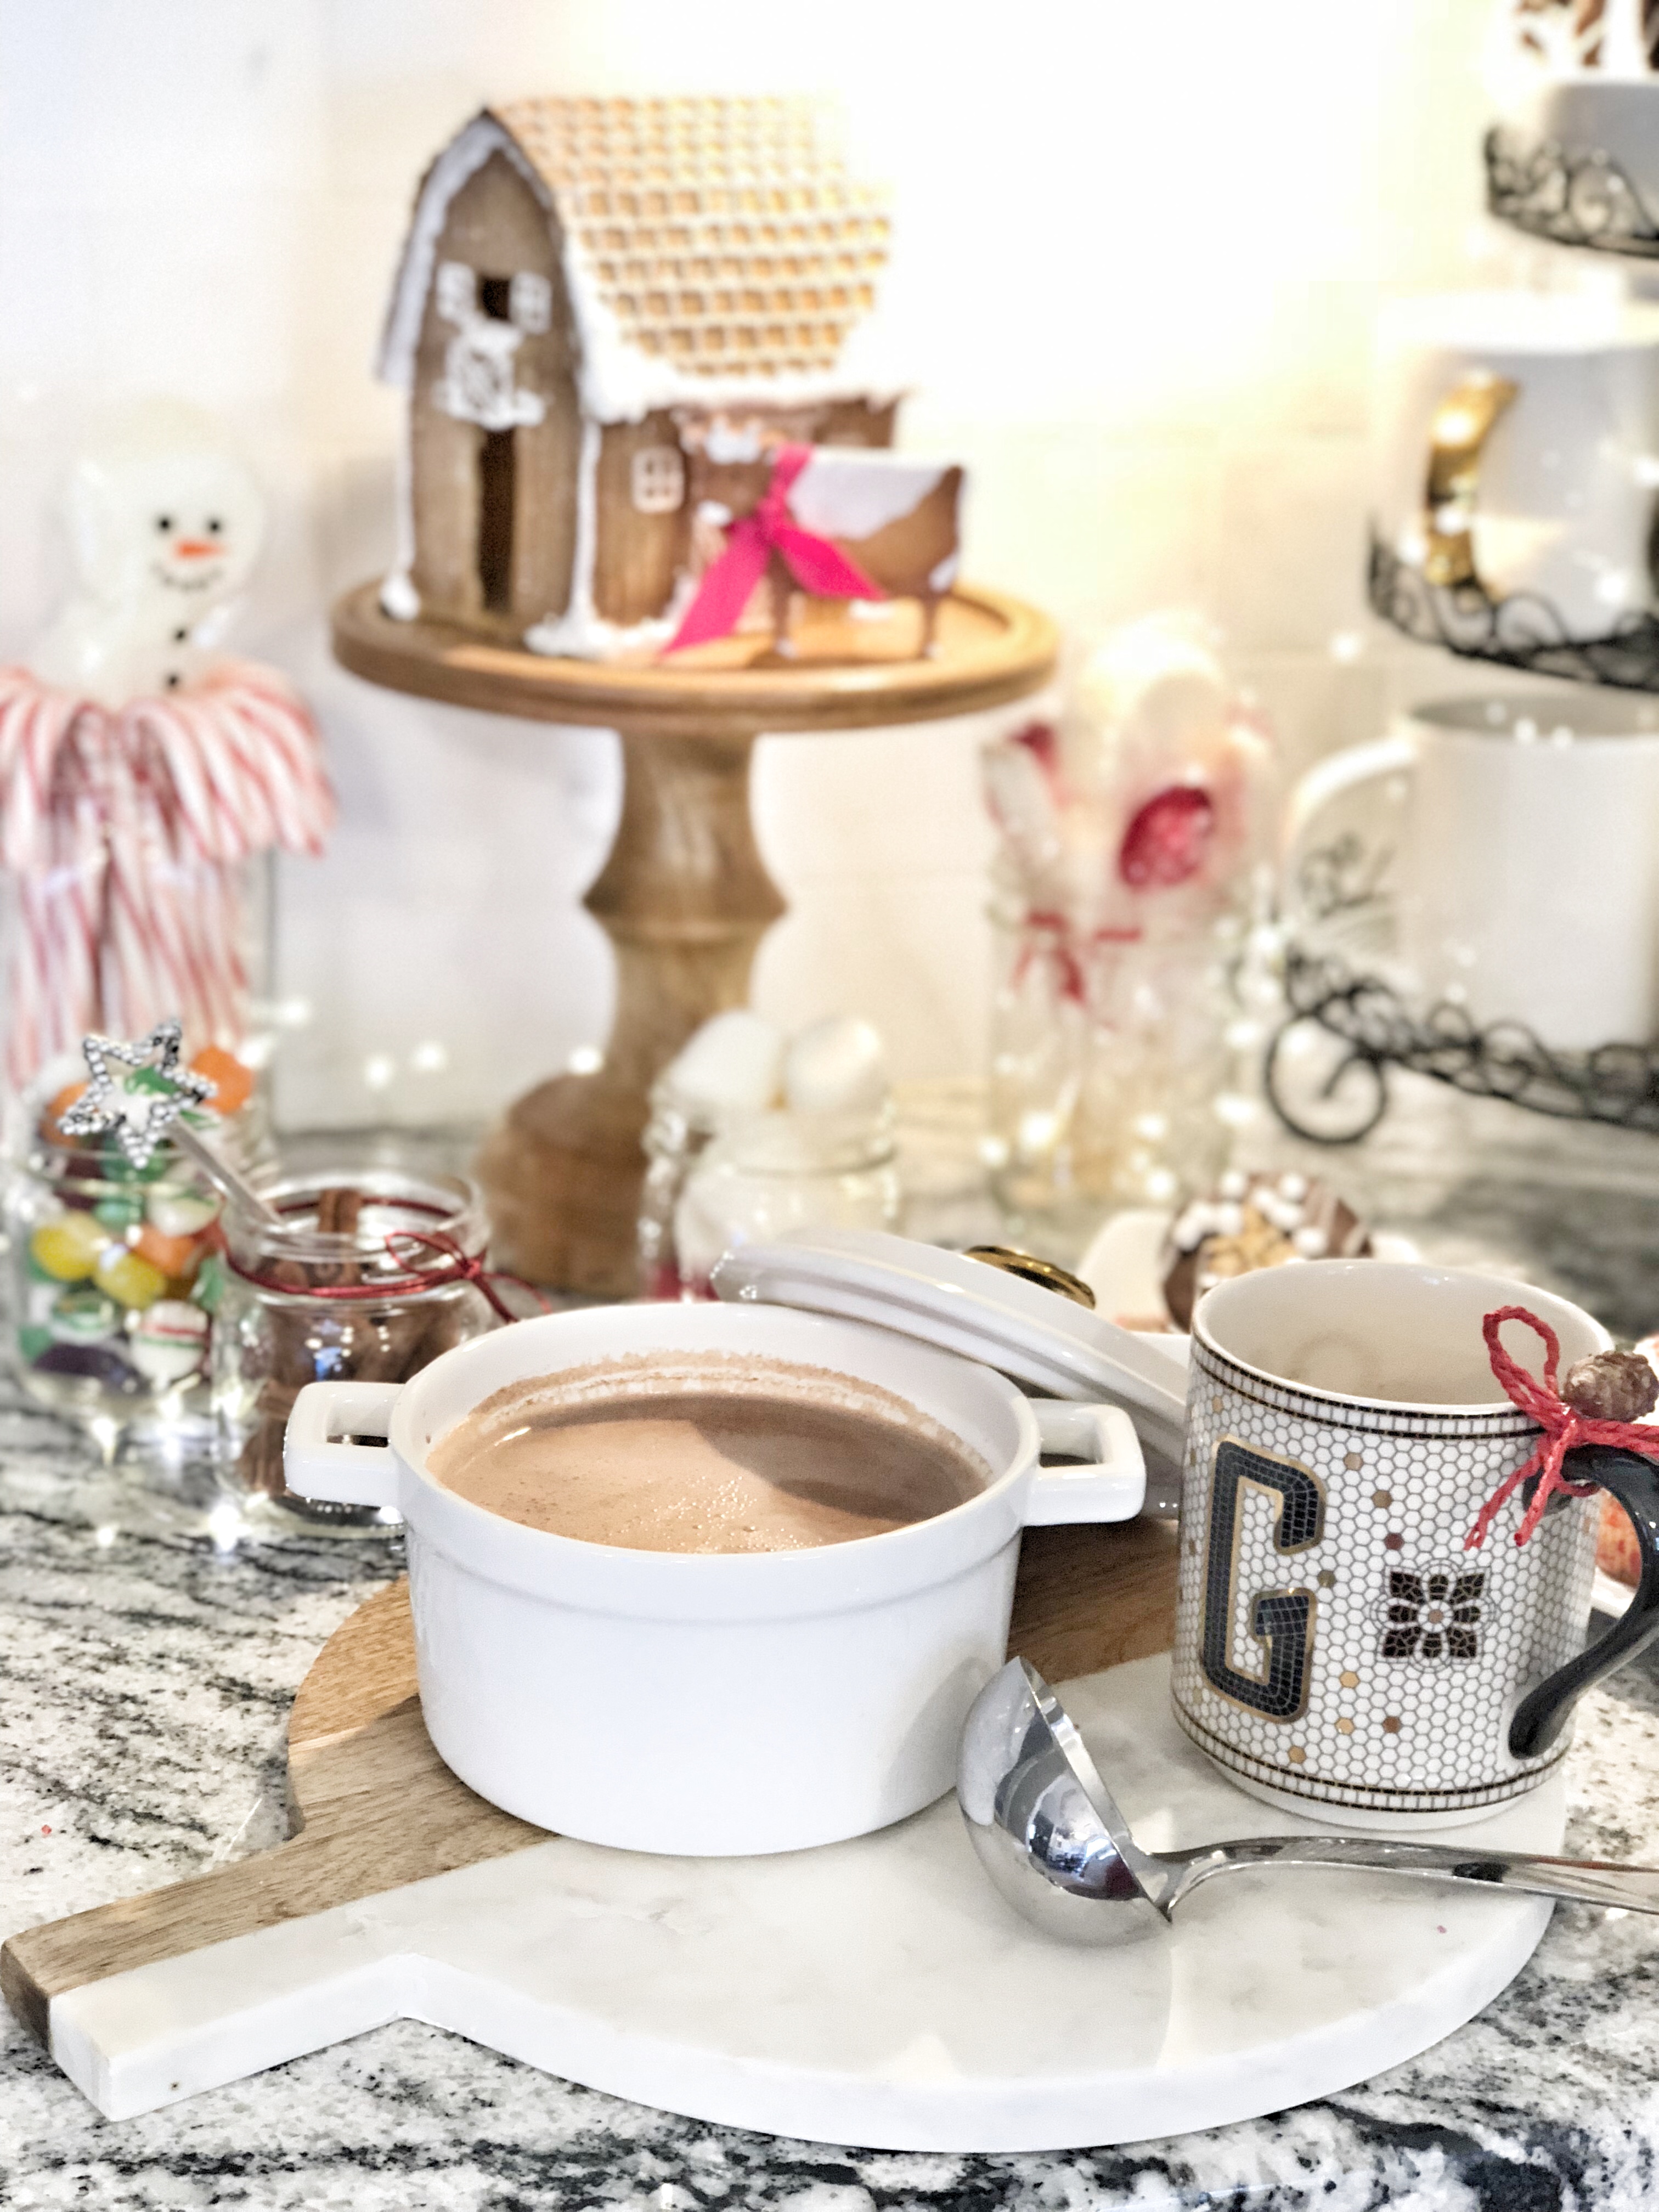 How to set up a simple and cozy Hot Chocolate Station.